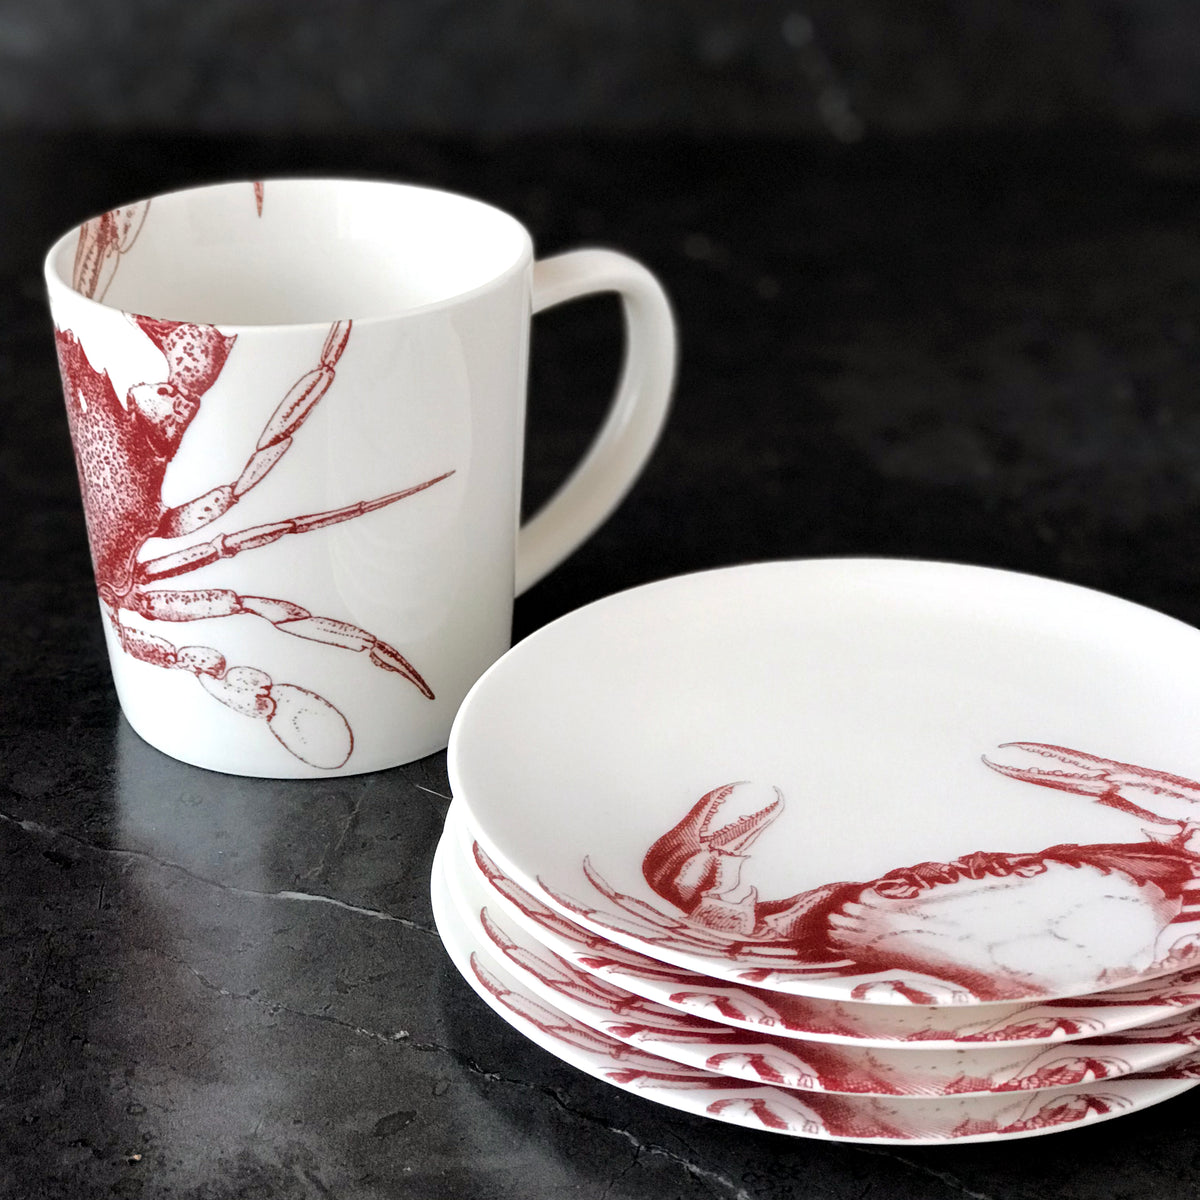 A white mug and a stack of Crab Red Small Plates, each adorned with red crab illustrations, are displayed on a dark surface, showcasing their heirloom-quality dinnerware in lead-free porcelain from Caskata Artisanal Home.